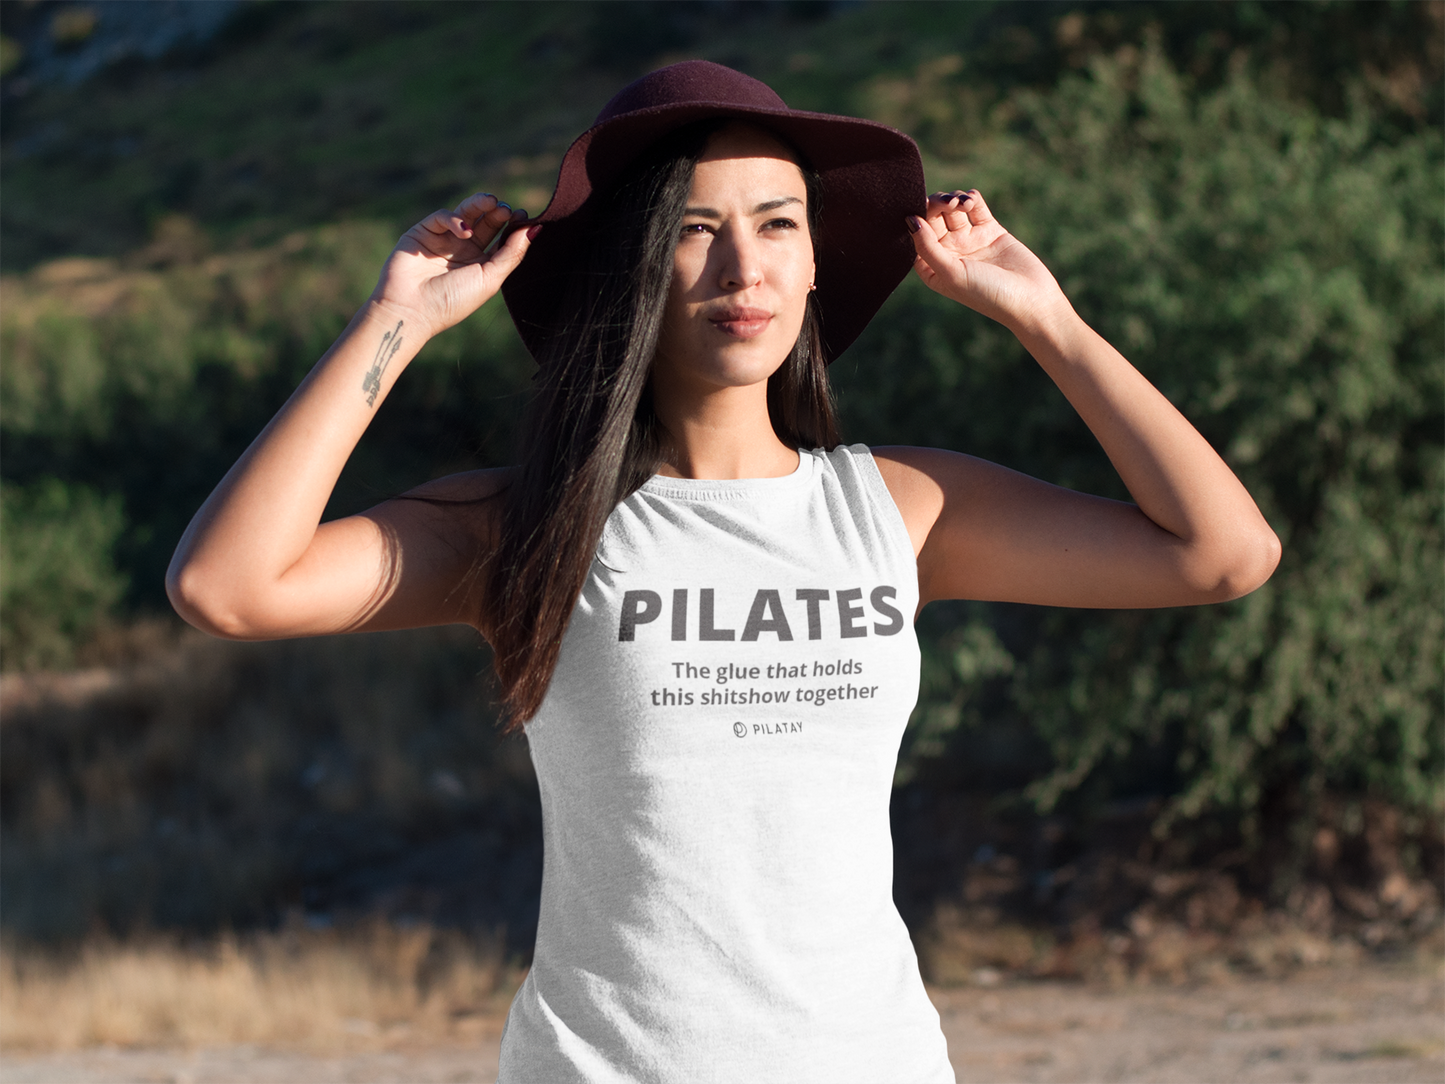 Pilates: The Glue That Holds This Shitshow Together Tank